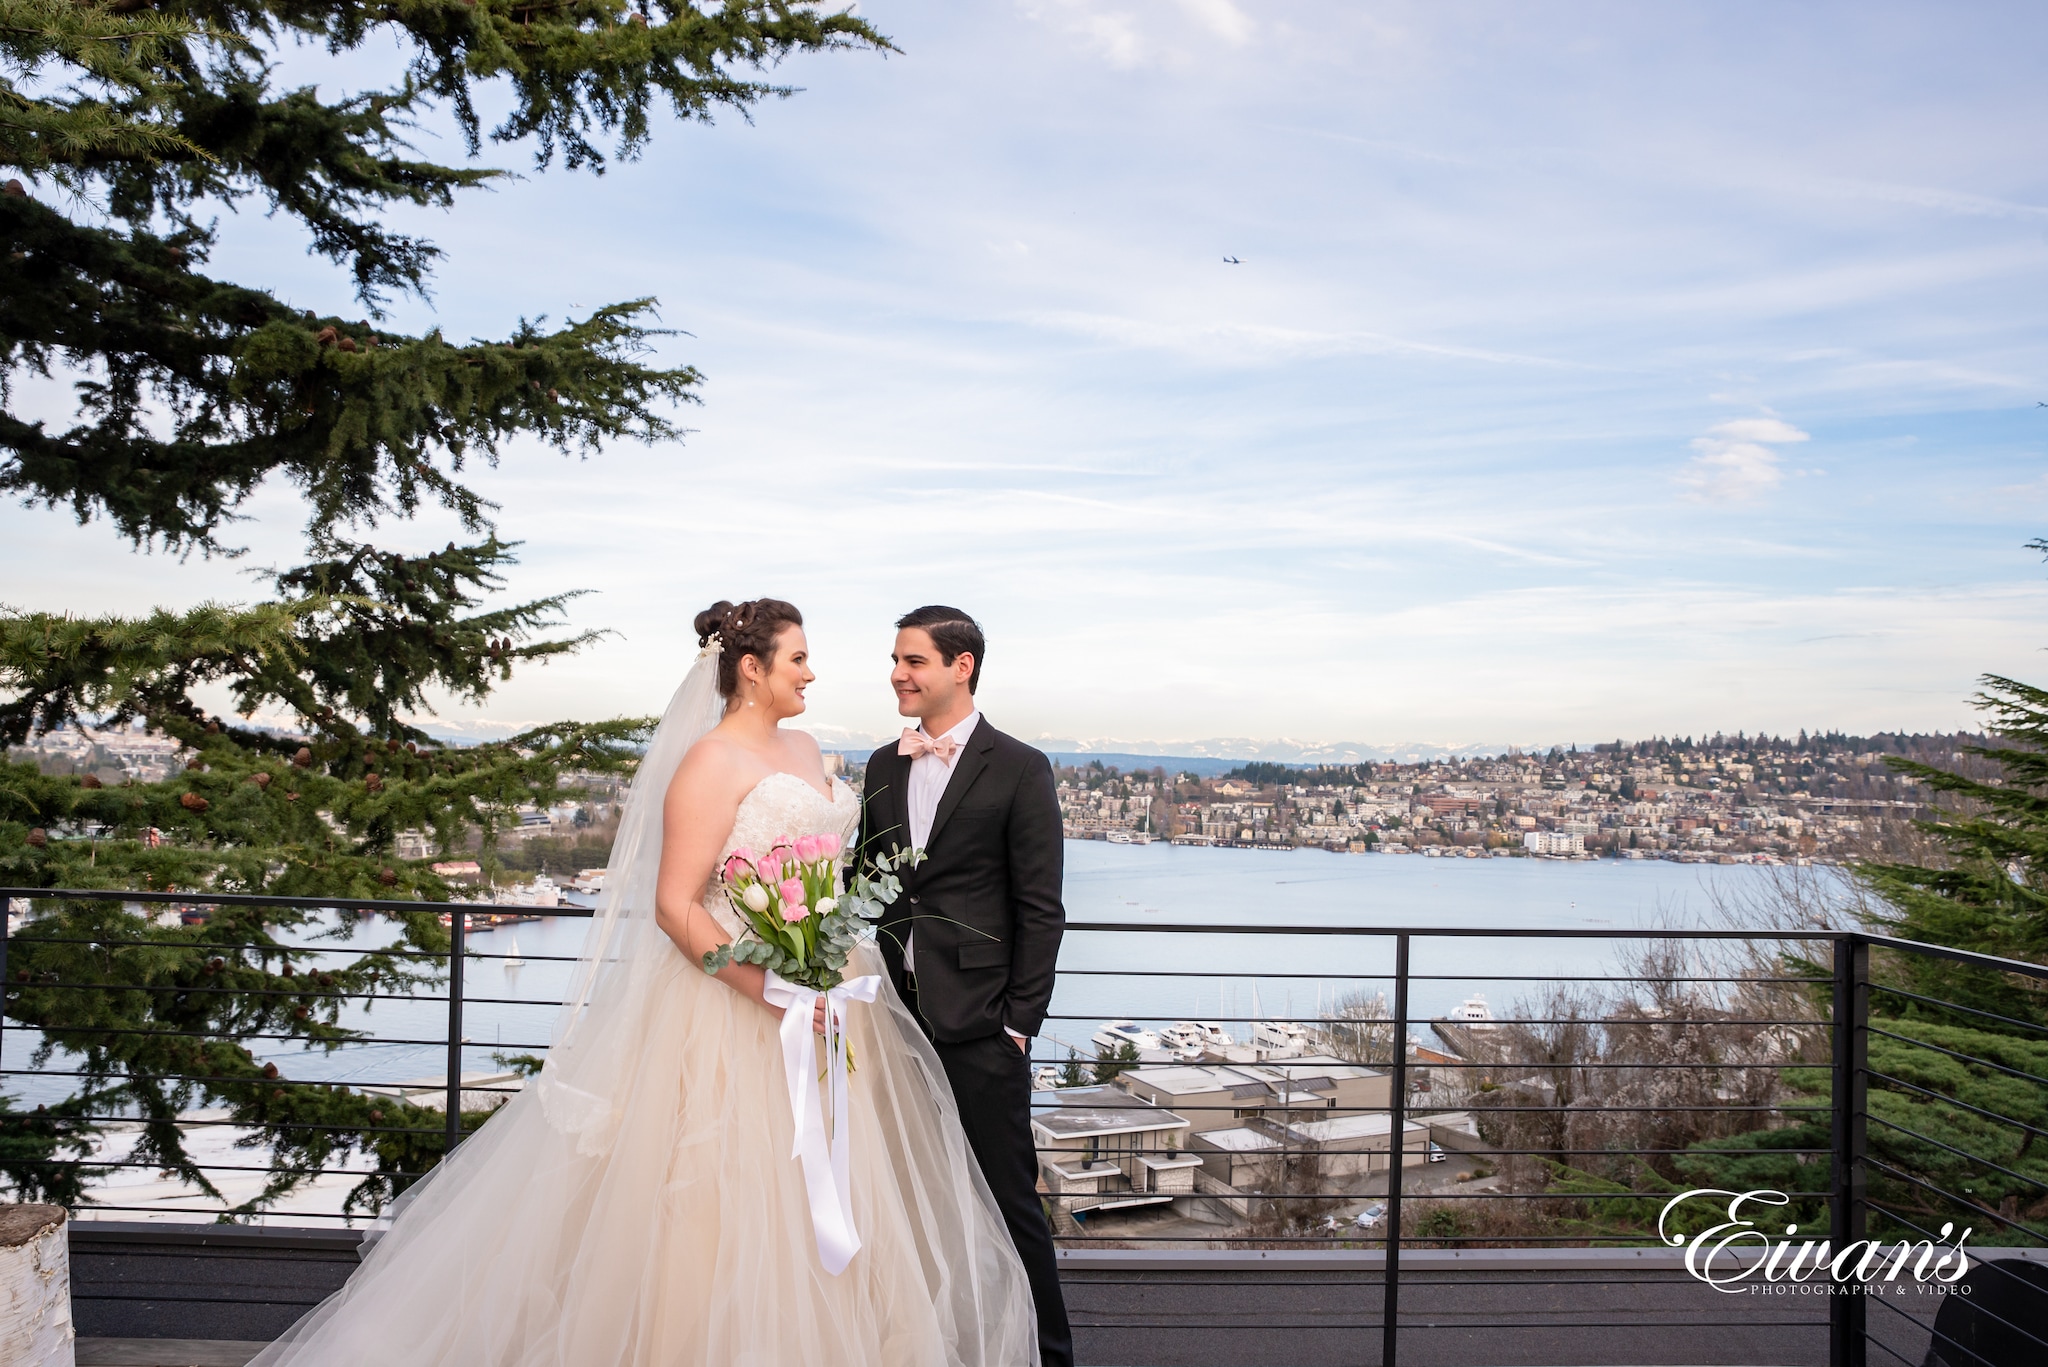 man in black suit and woman in white wedding dress